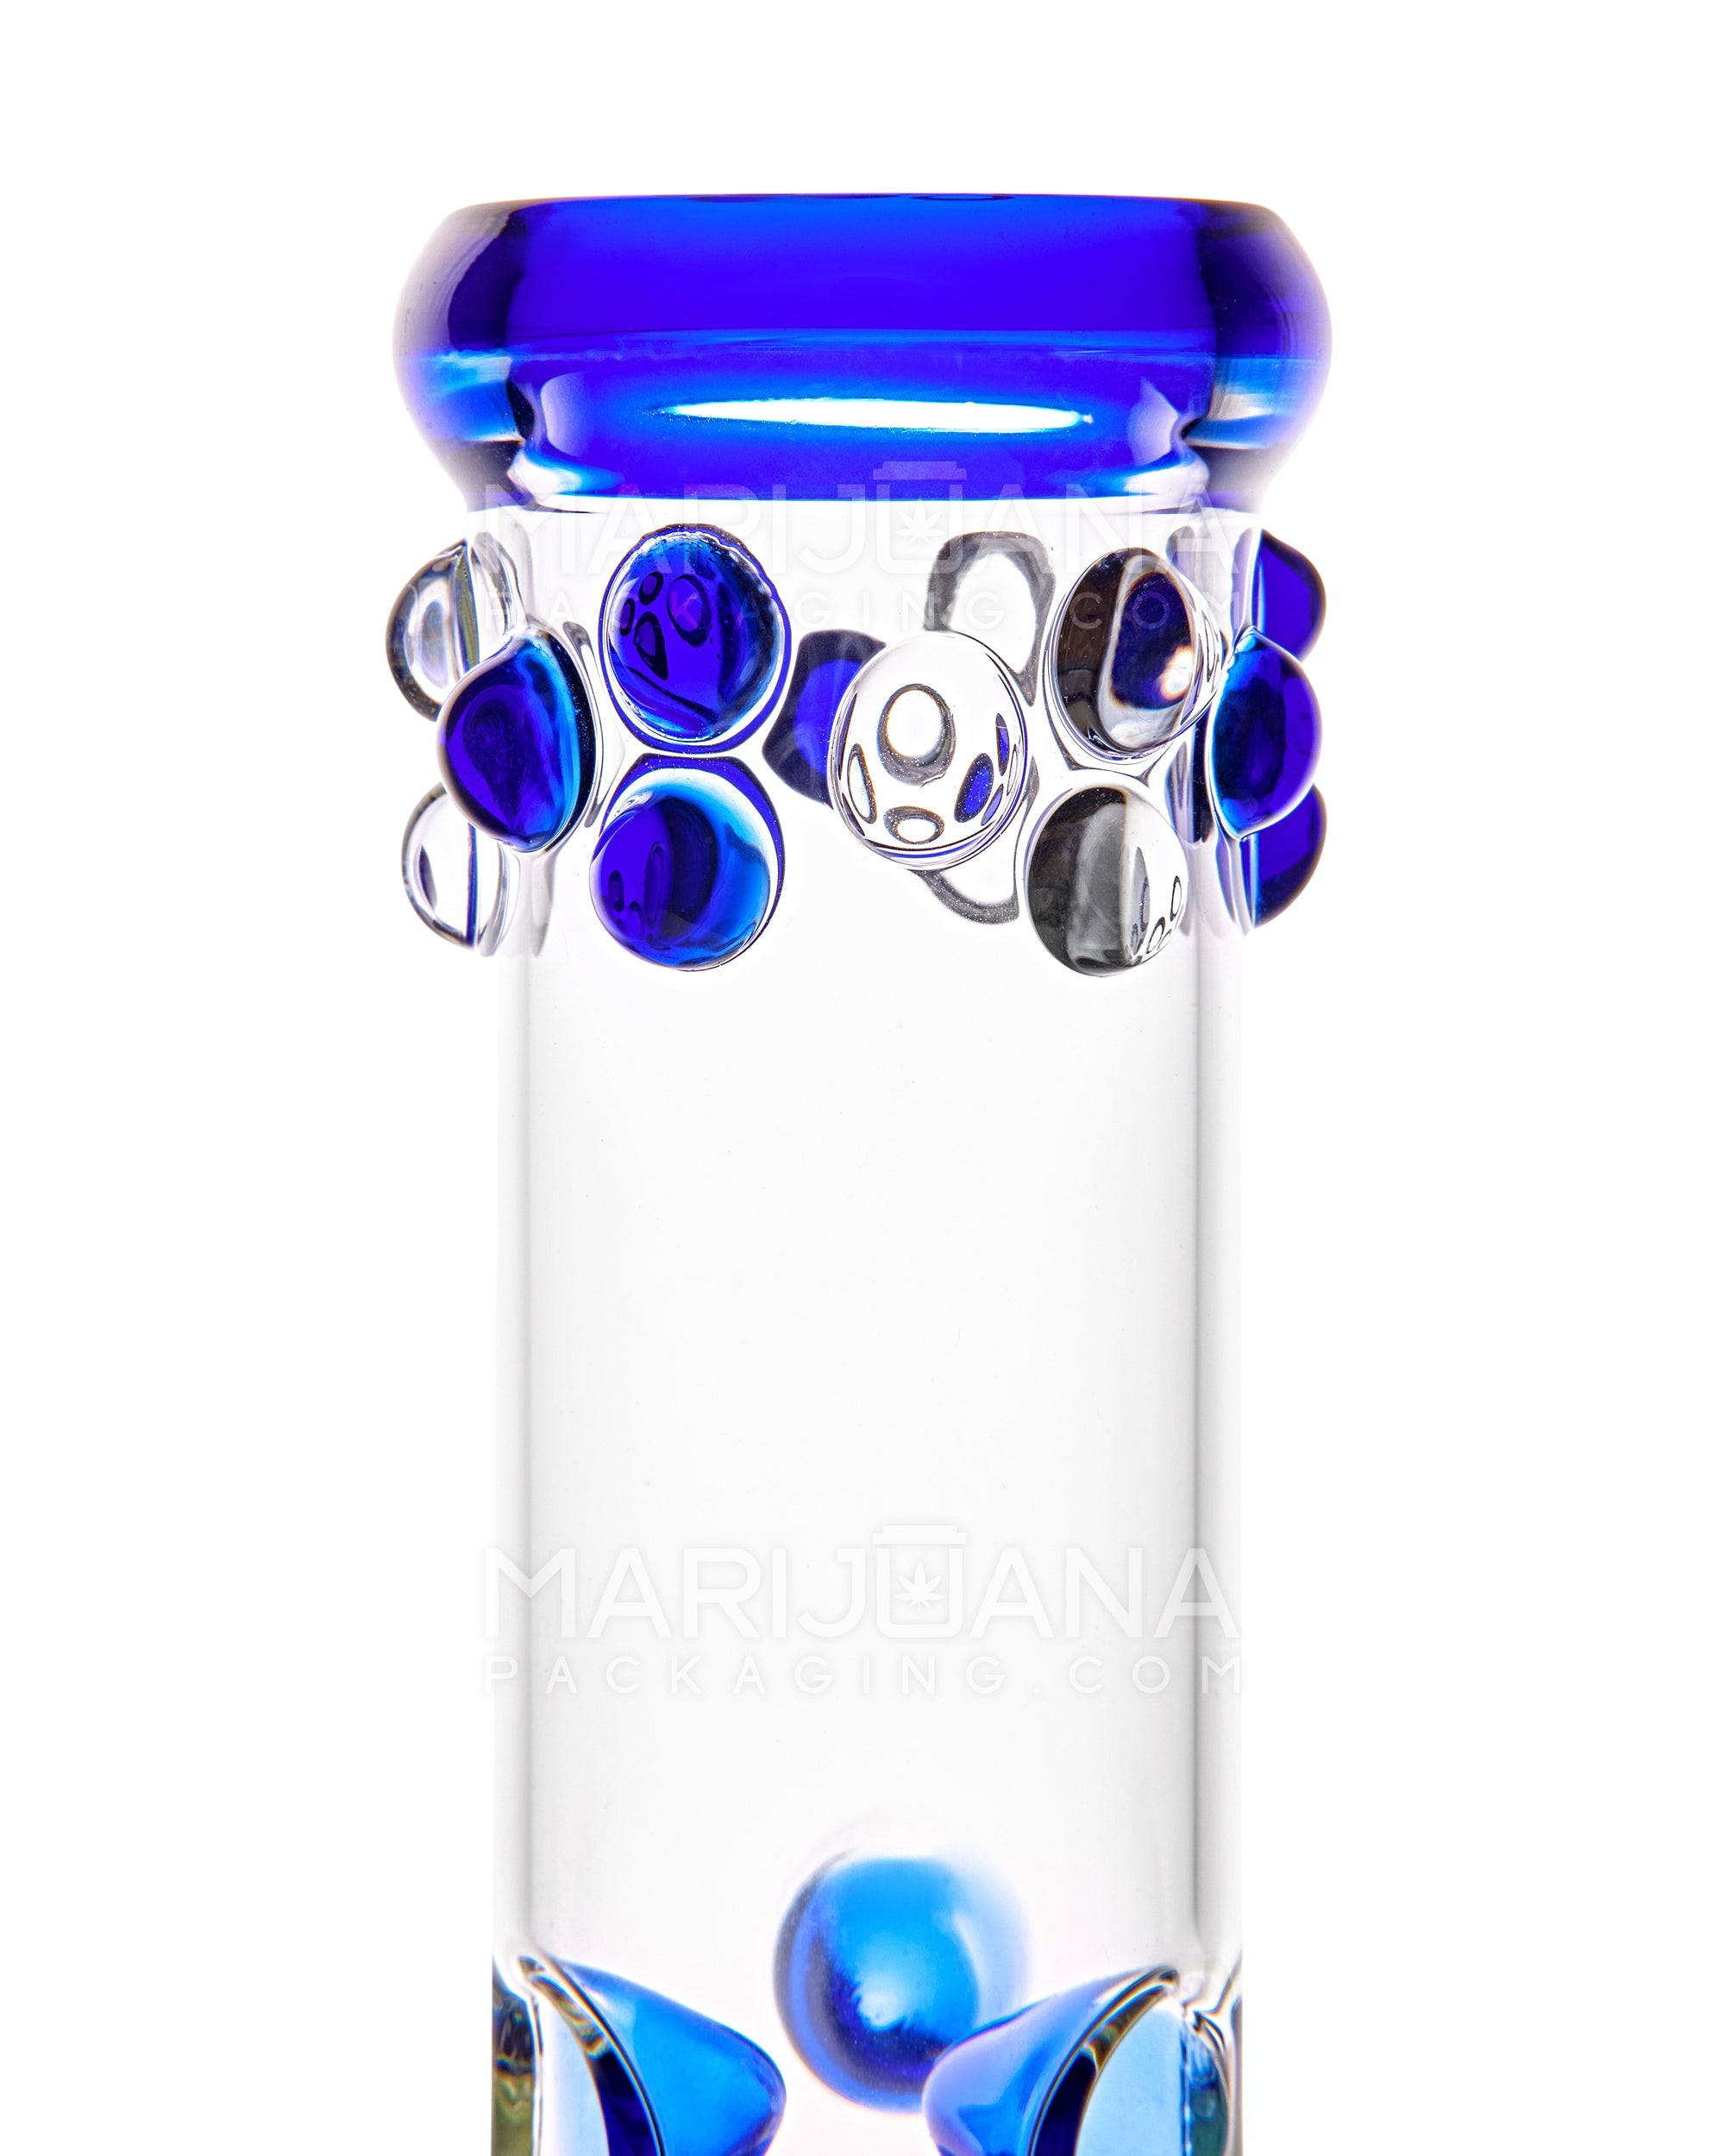 Straight Neck Tree Perc Thick Glass Beaker Water Pipe w/ Ice Catcher | 12in Tall - 14mm Bowl - Blue - 4